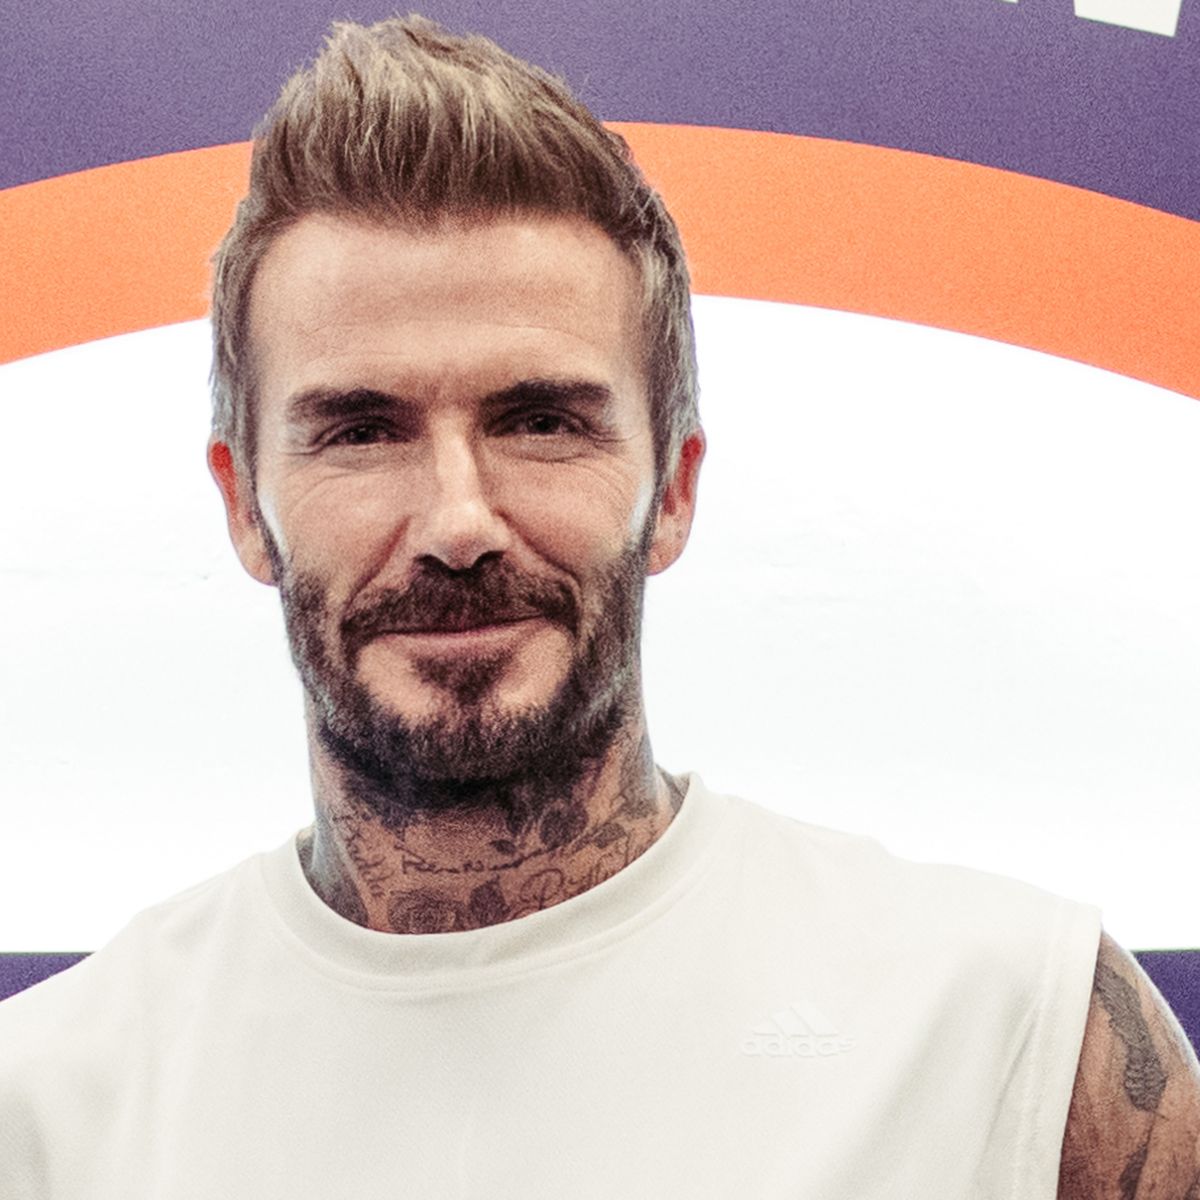 David Beckham Launches Soccer-Inspired Workout DB45